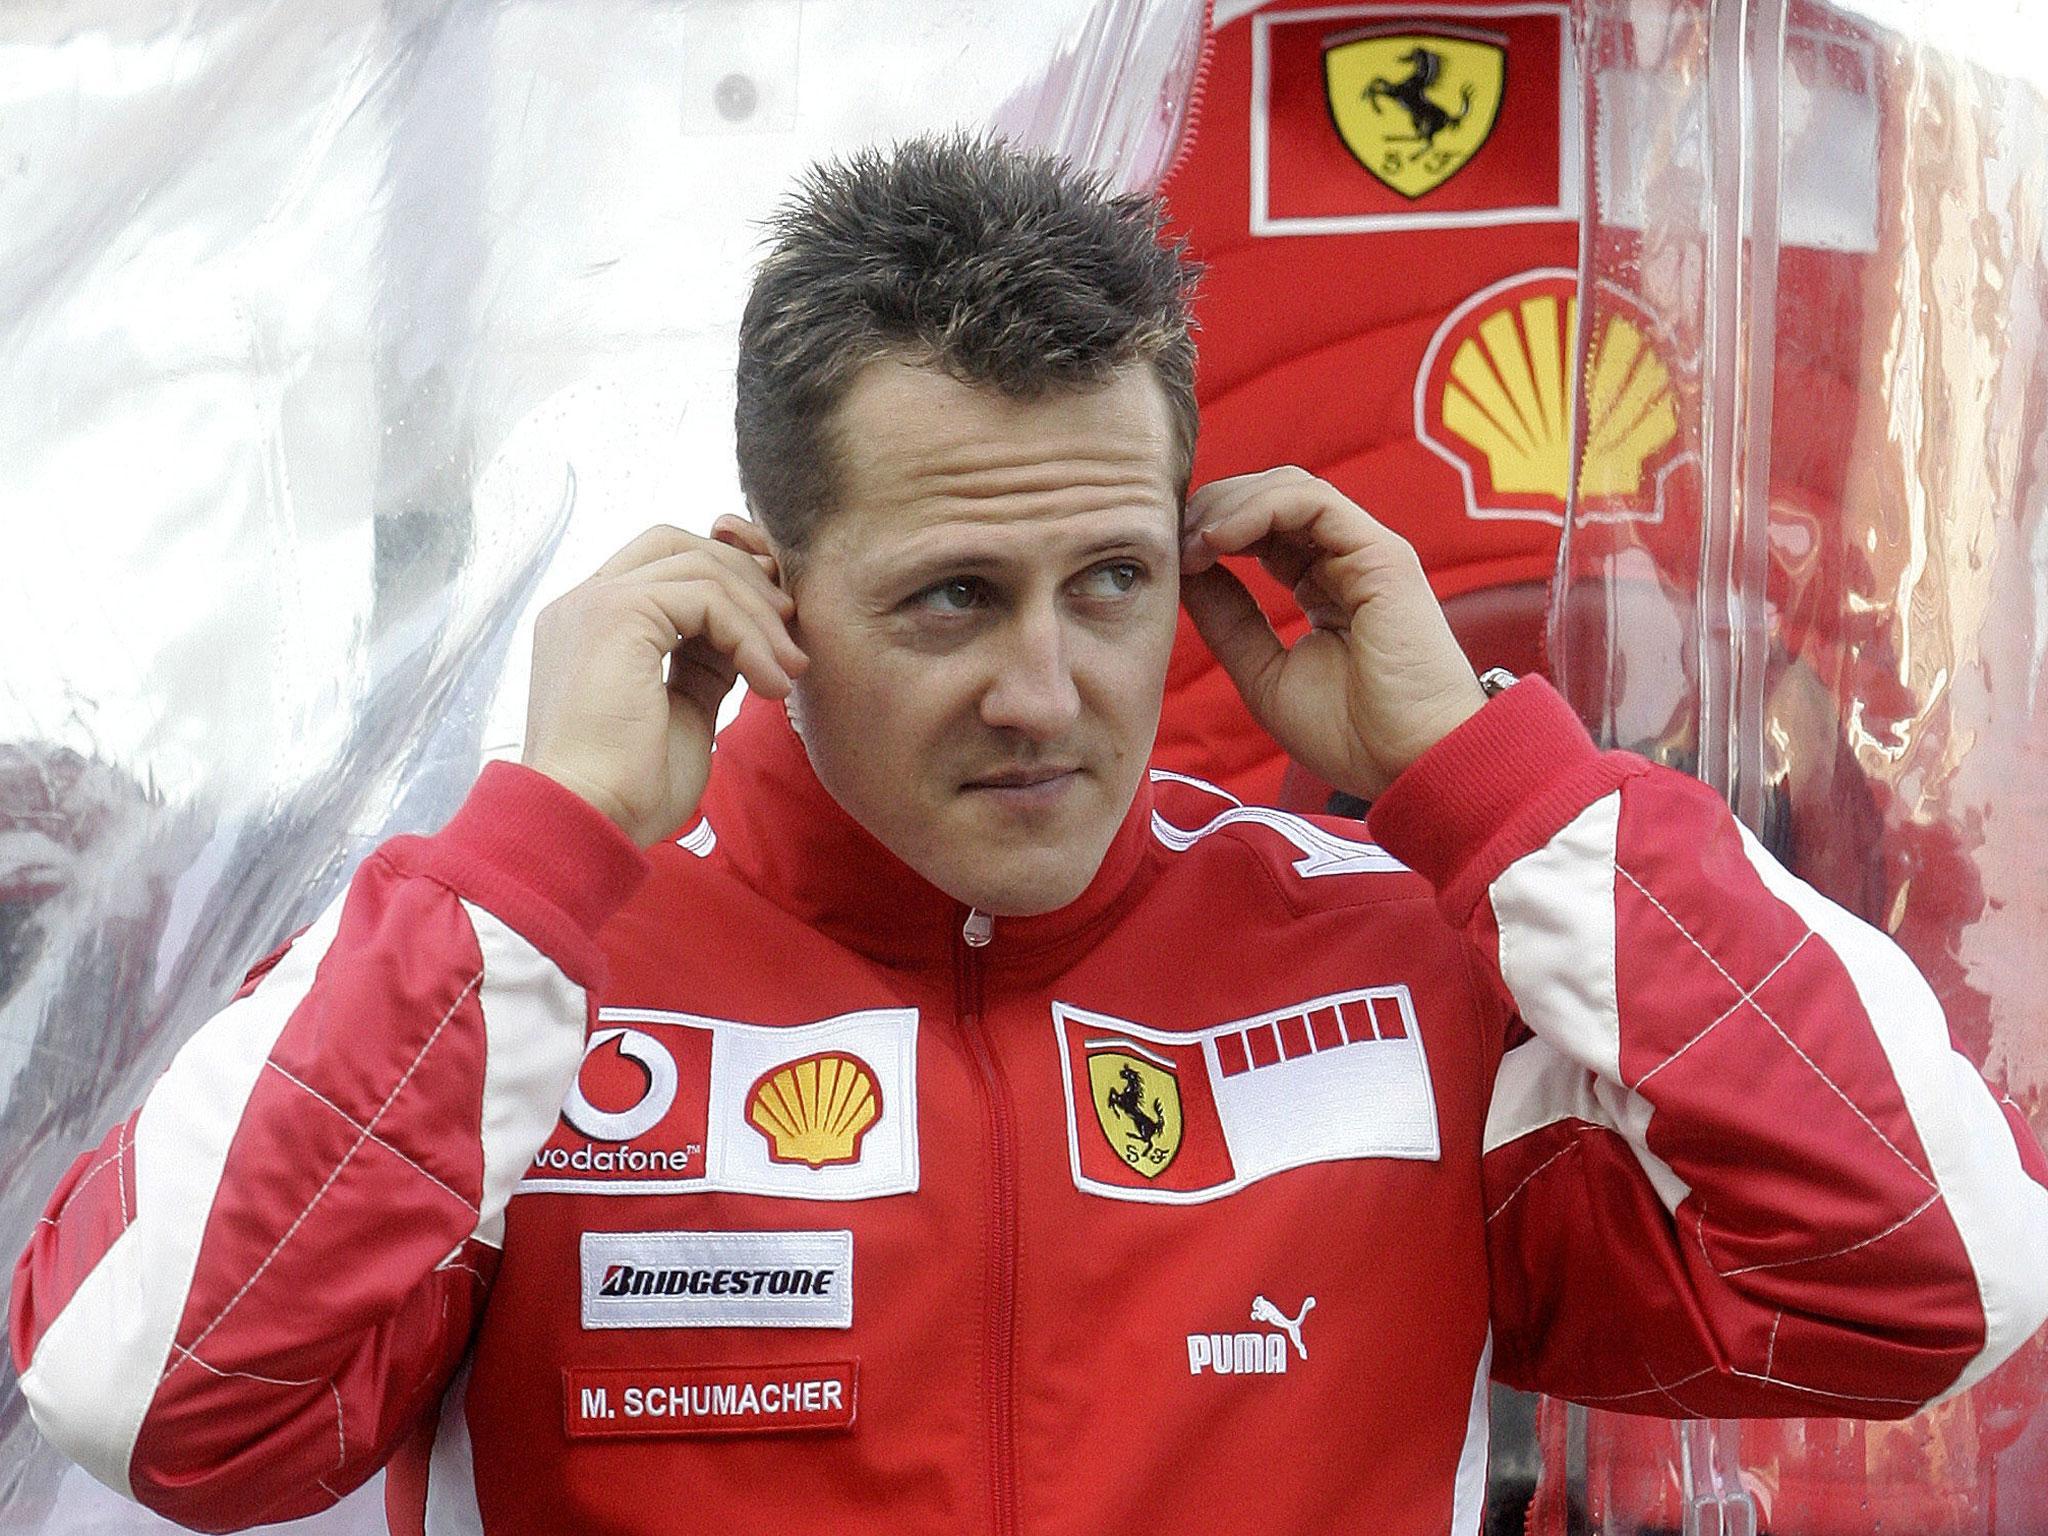 Investigators are examining the helmet camera Michael Schumacher was wearing at the time of the skiing accident in an attempt to find out what caused him to fall